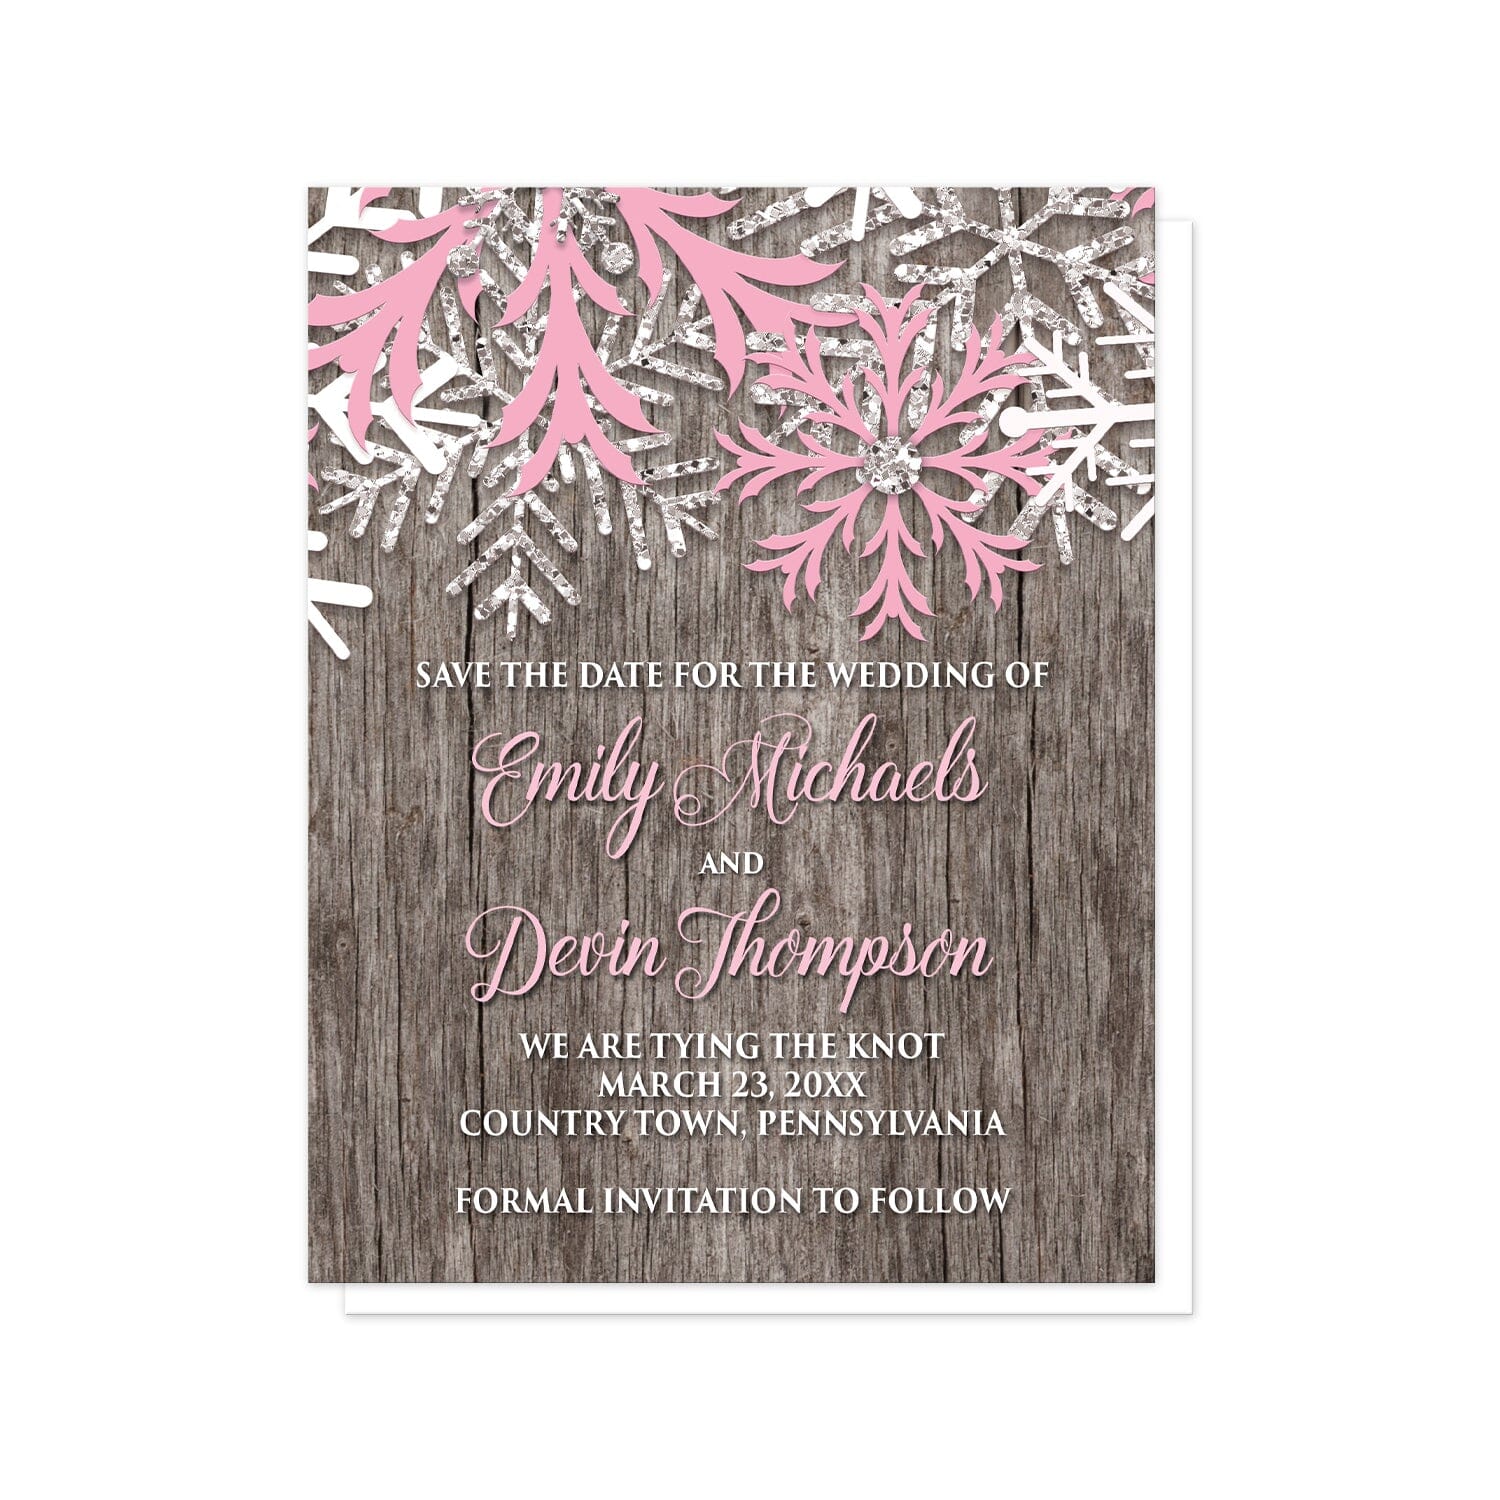 Rustic Winter Wood Pink Snowflake Save the Date Cards at Artistically Invited. Country-inspired rustic winter wood pink snowflake save the date cards designed with pink, white, and silver-colored glitter-illustrated snowflakes along the top over a rustic wood pattern illustration. Your personalized wedding date details are custom printed in pink and white over the wood background below the snowflakes.